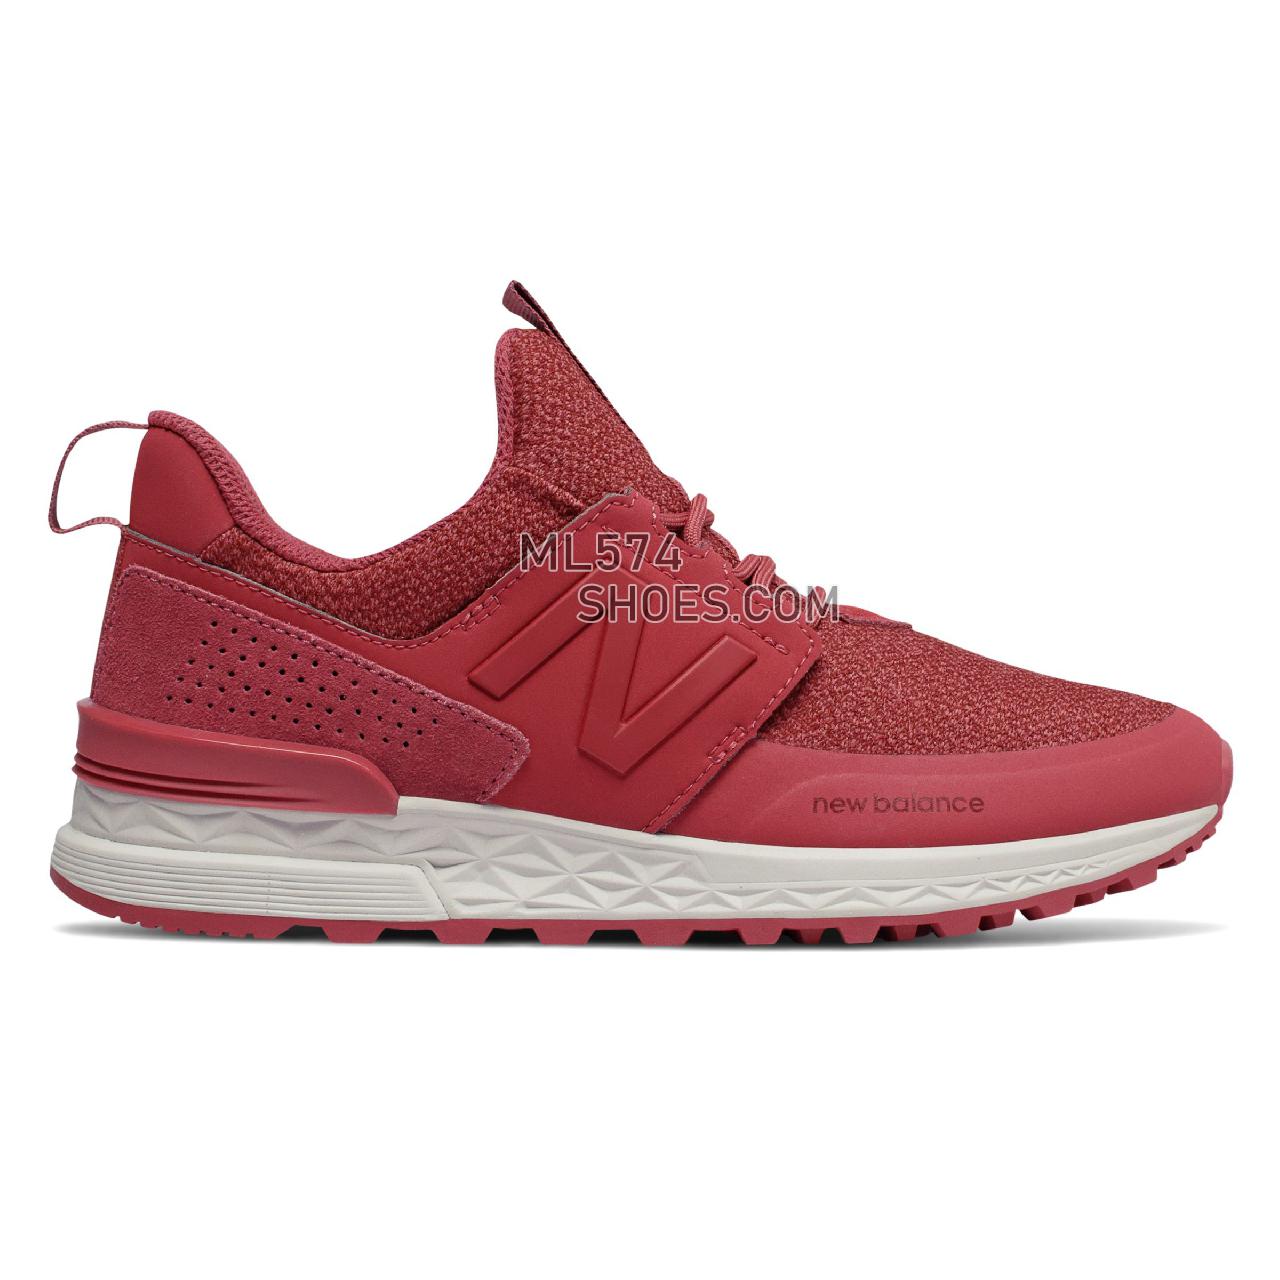 New Balance 574 Sport - Women's 574 - Classic Earth Red - WS574DTG